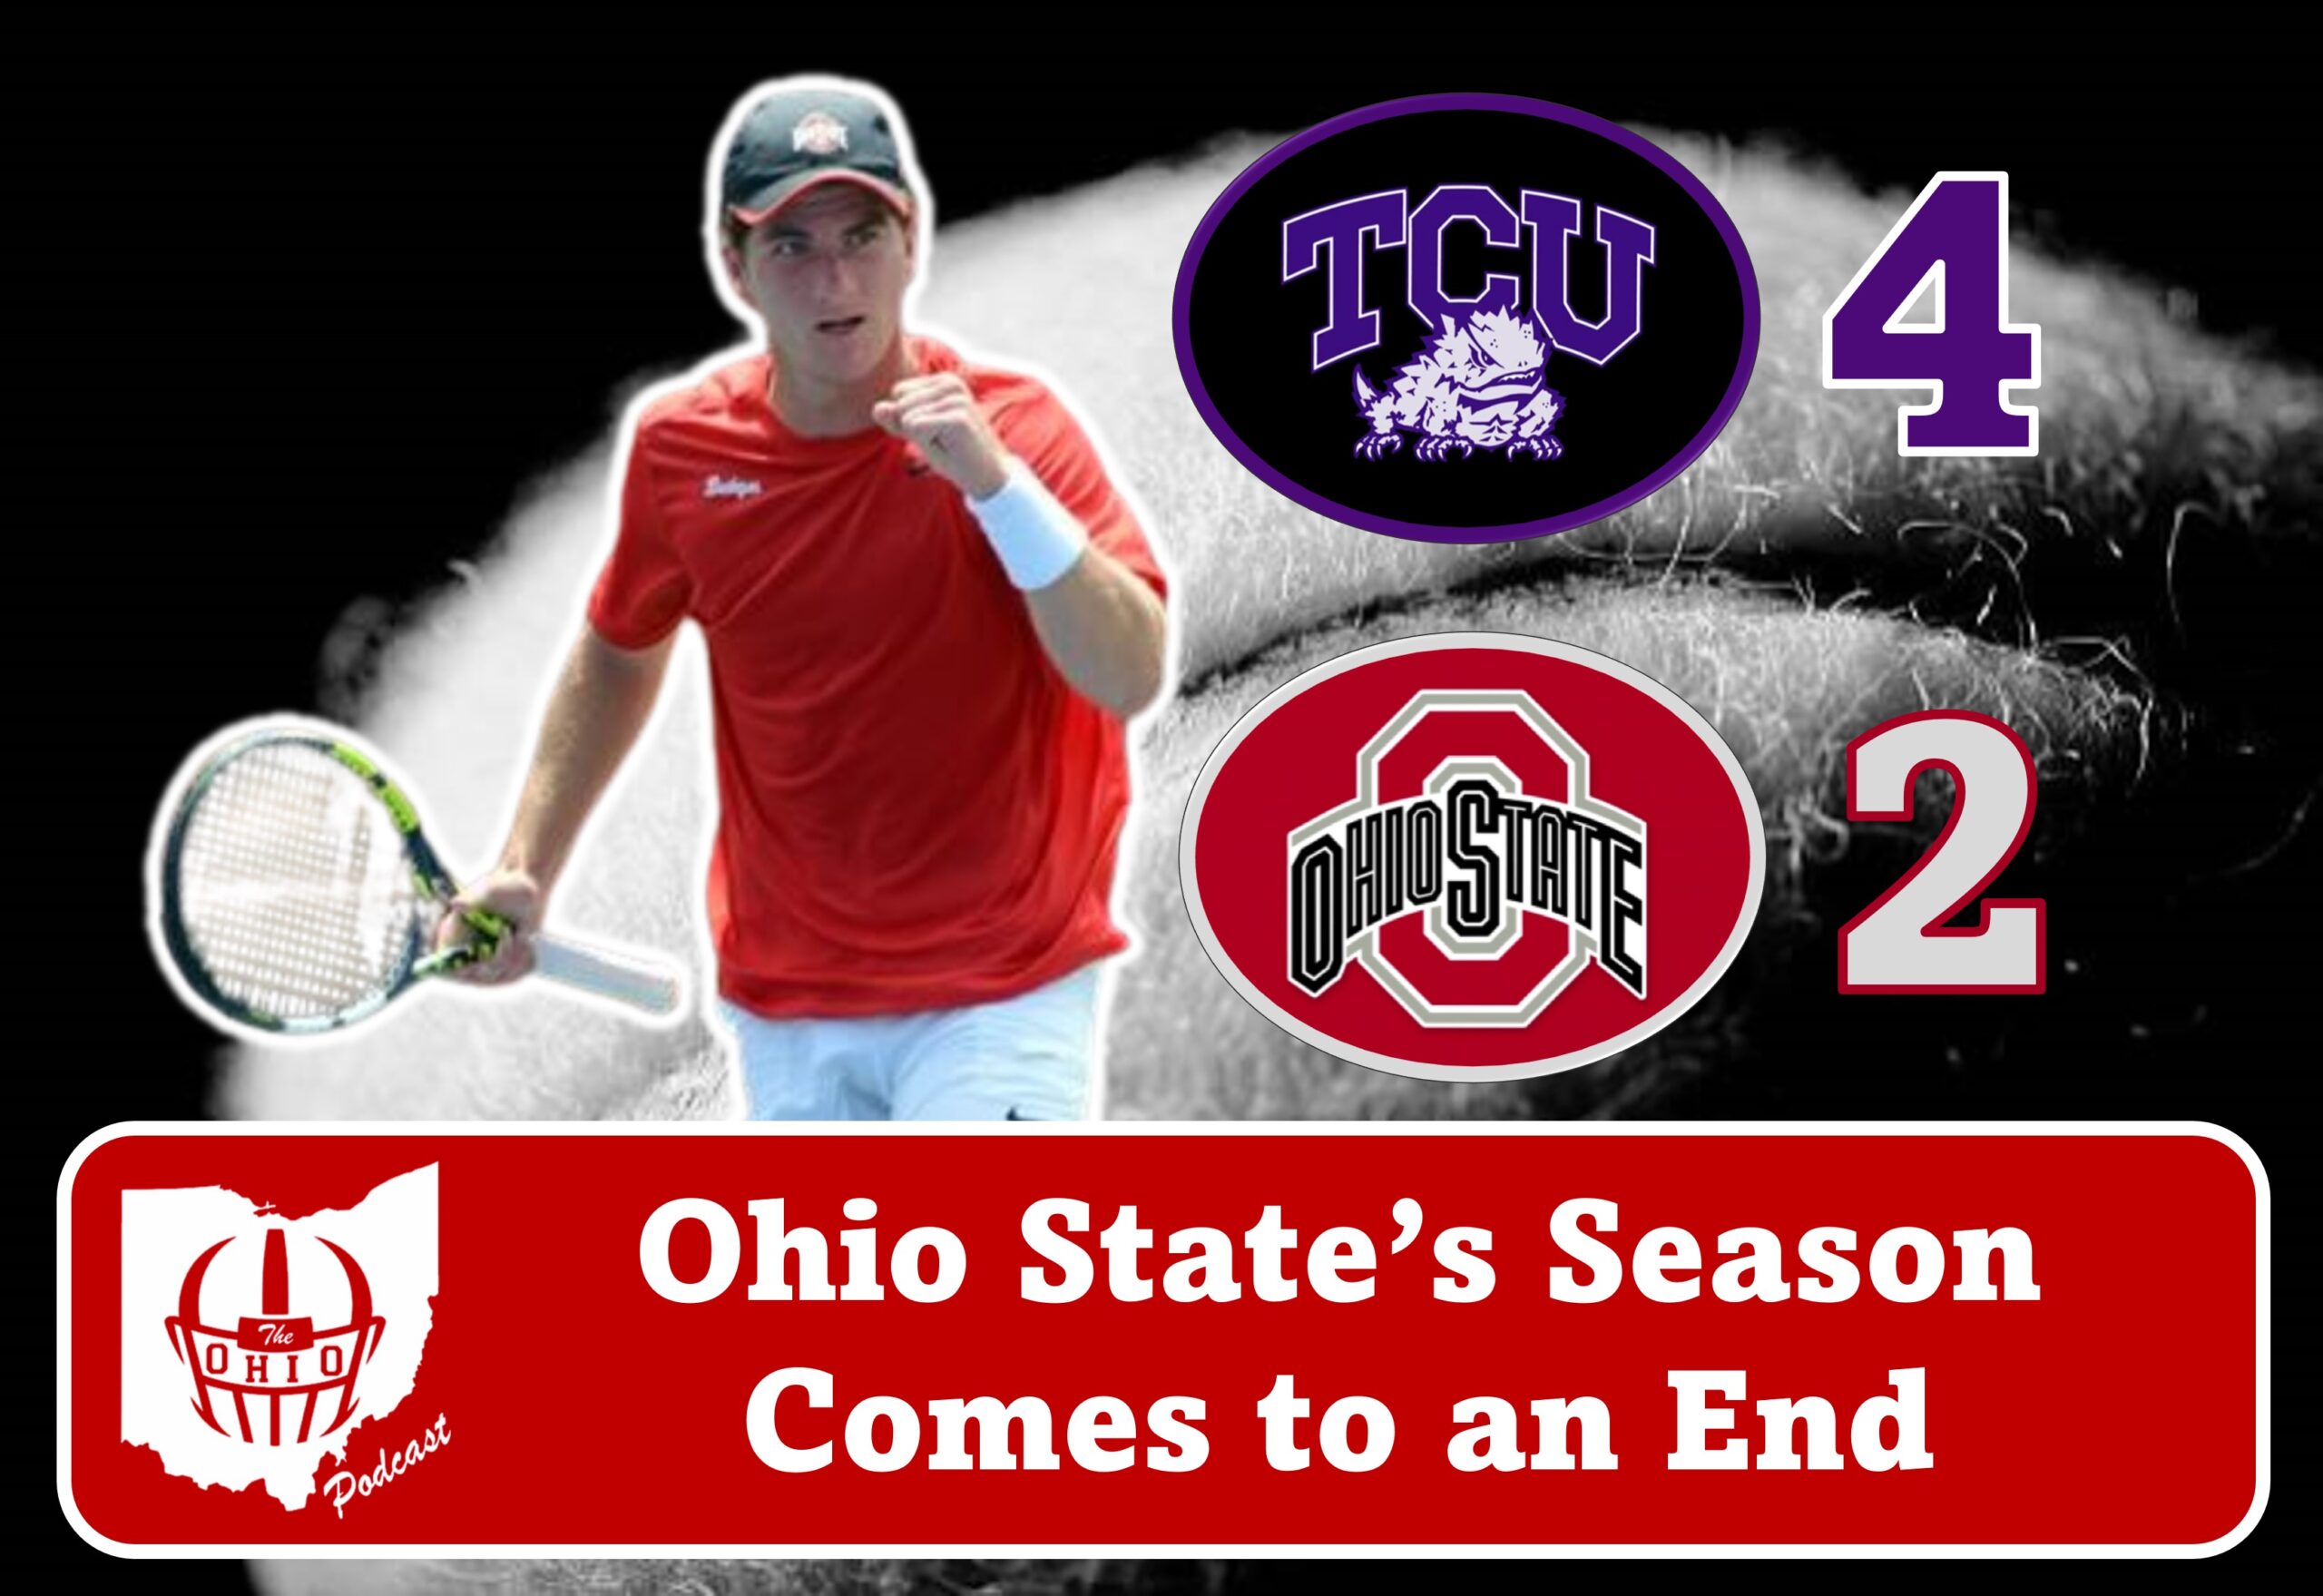 Ohio State's Tennis Season Comes to an End